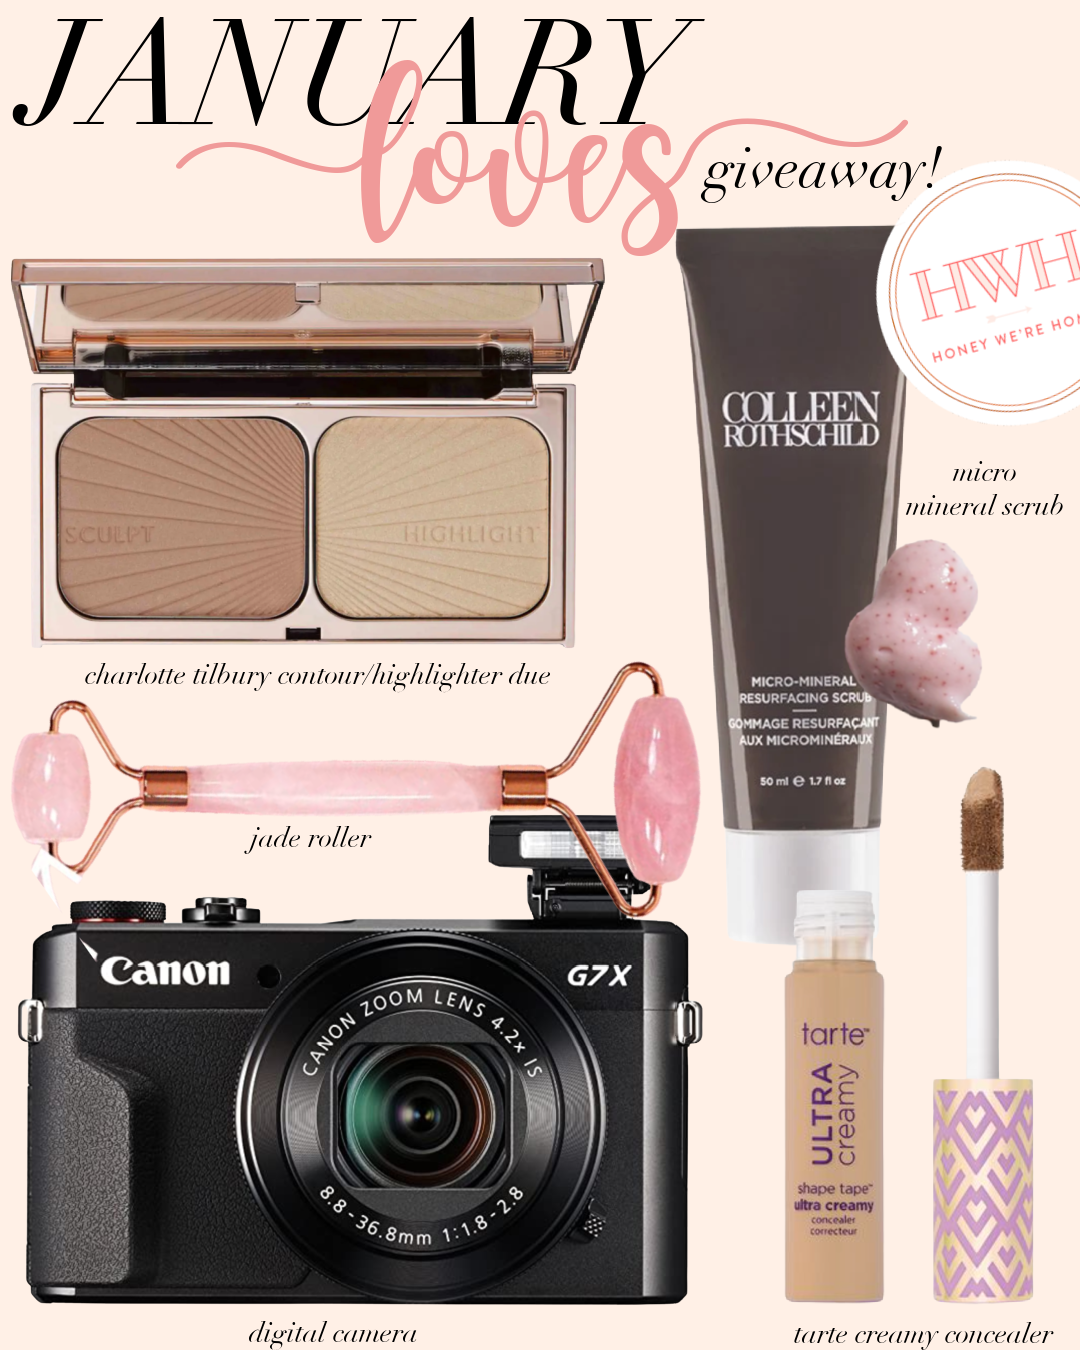 January Loves GIVEAWAY